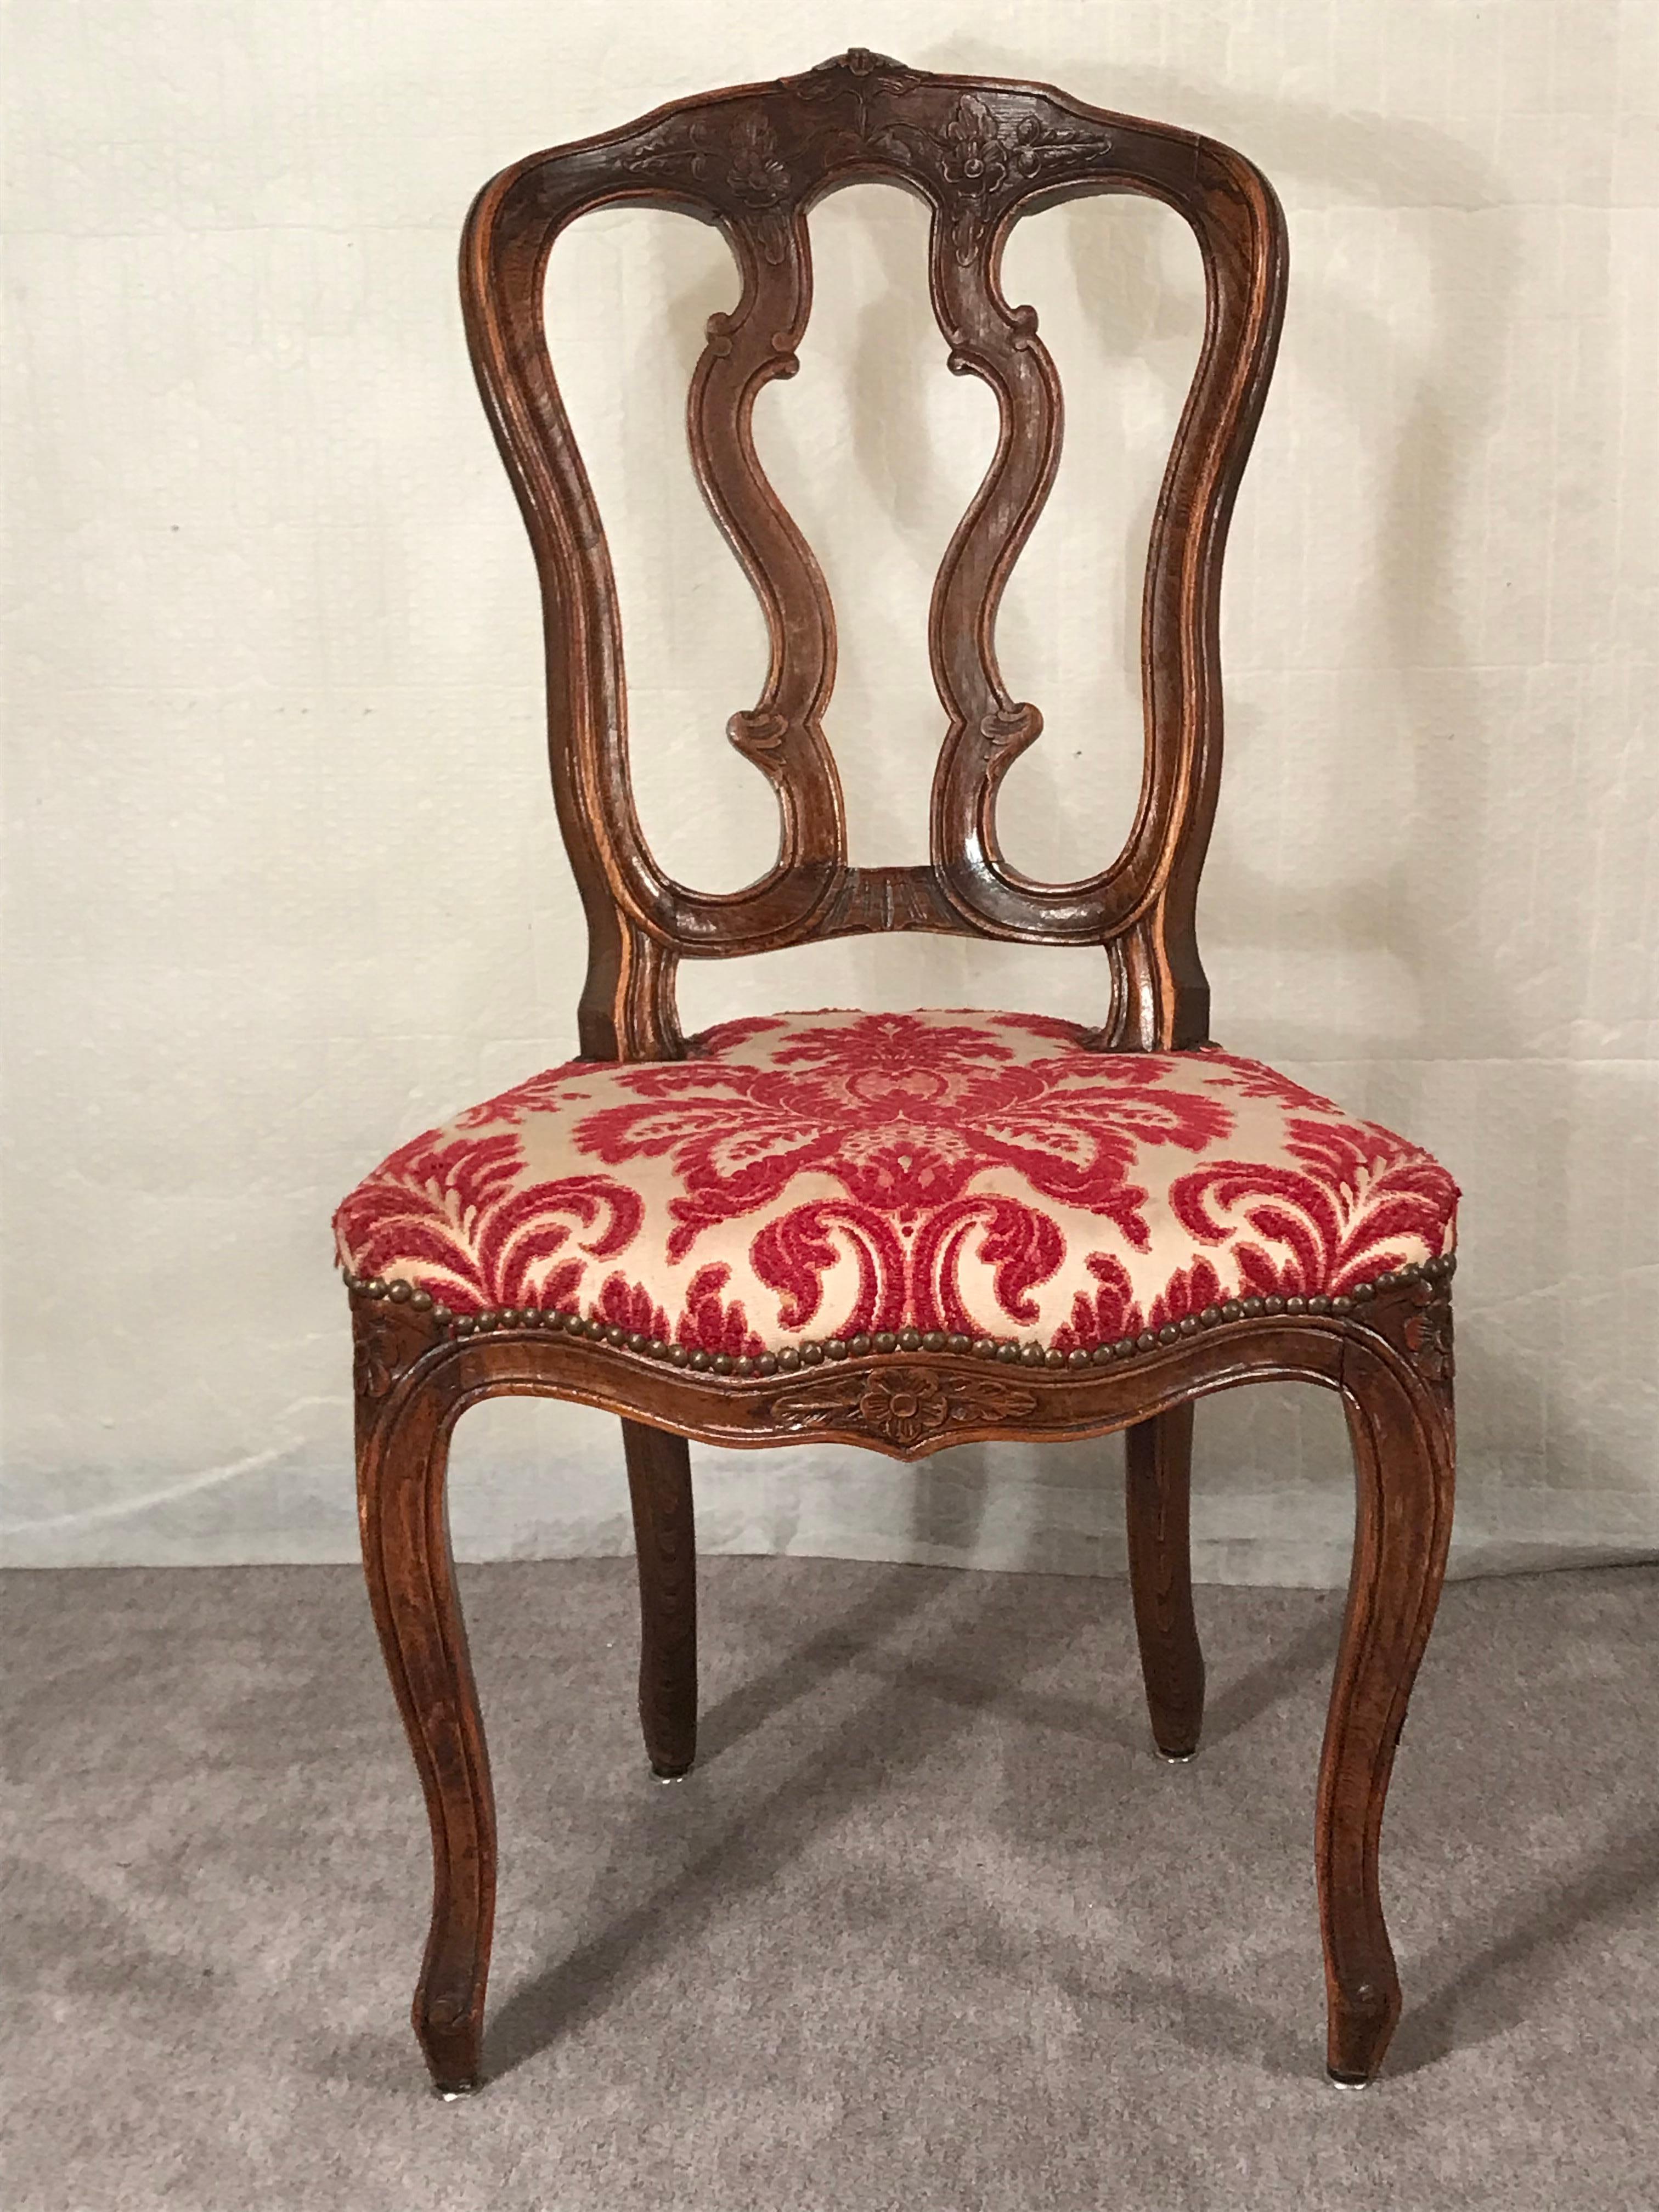 This original set of 6 Baroque chairs comes from France and dates back to around 1760. These pretty 18th century chairs are made of hand carved oak. They are decorated with fine rocaille and flower decorations. 
The chairs are in original